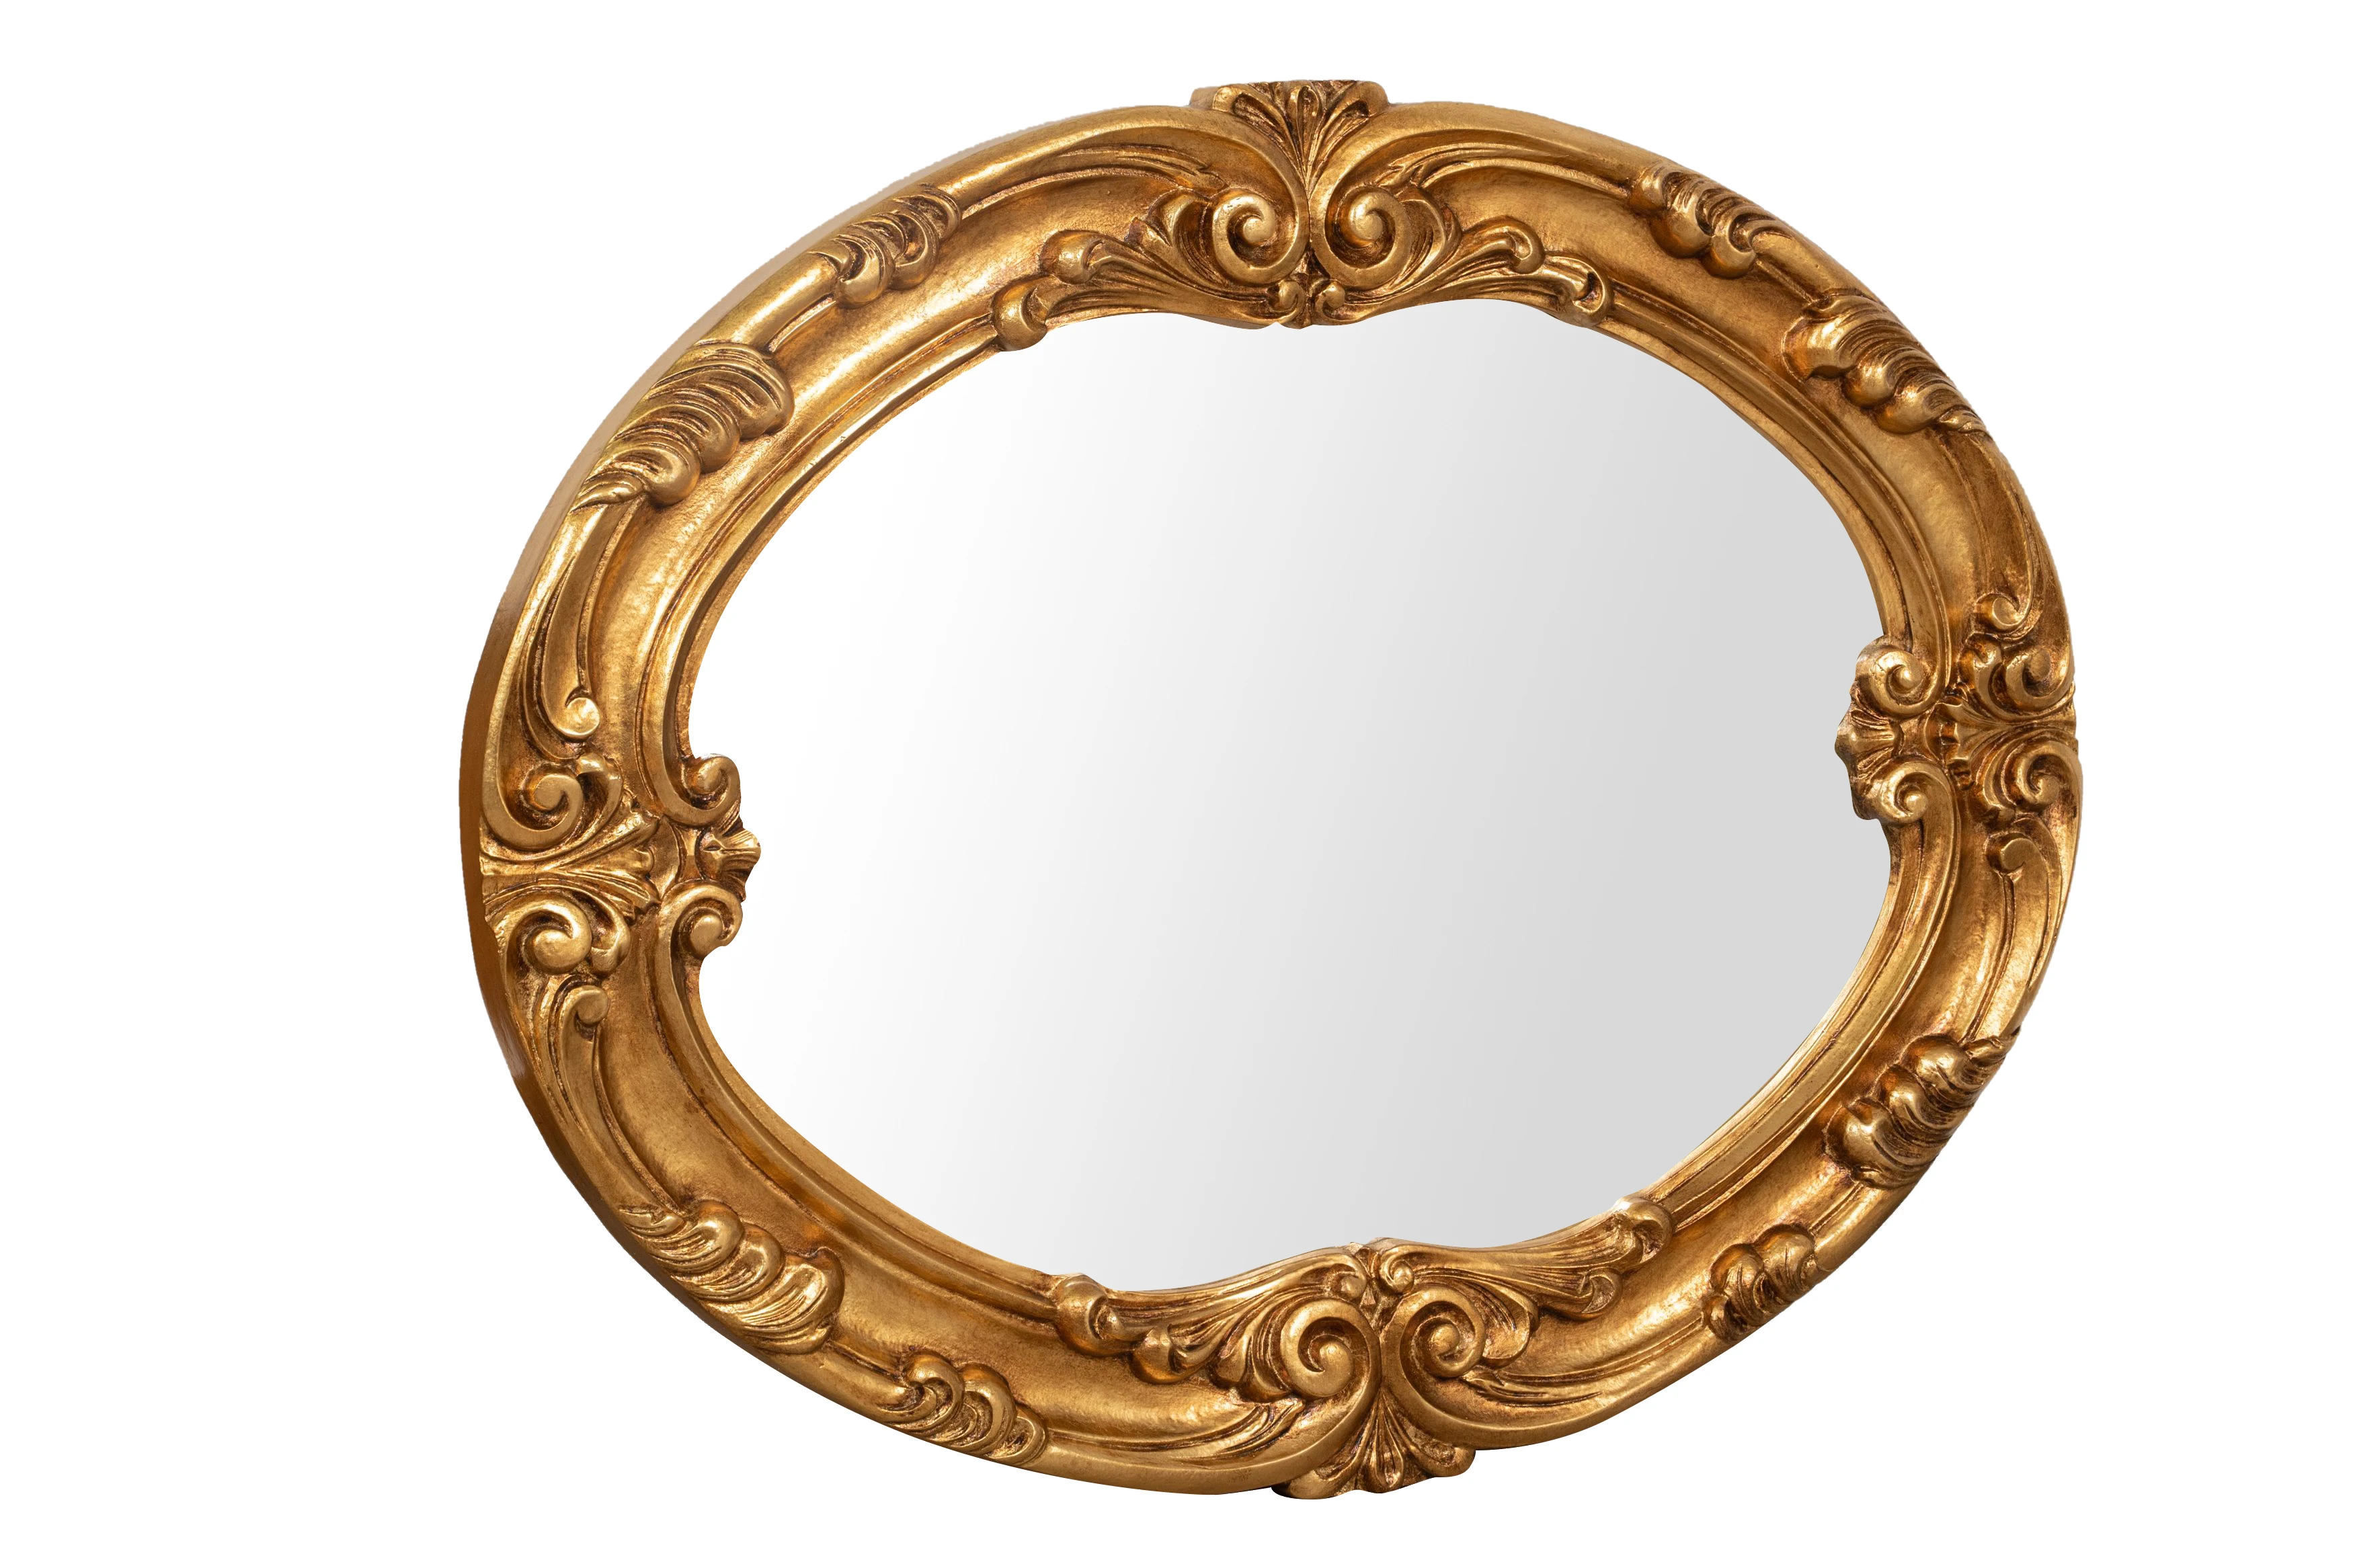 Best Sell High Quality Made in Italy Wooden Wall Mirror with antique gold leaf finish L85XPR6XH105 CM Biscottini For Retail